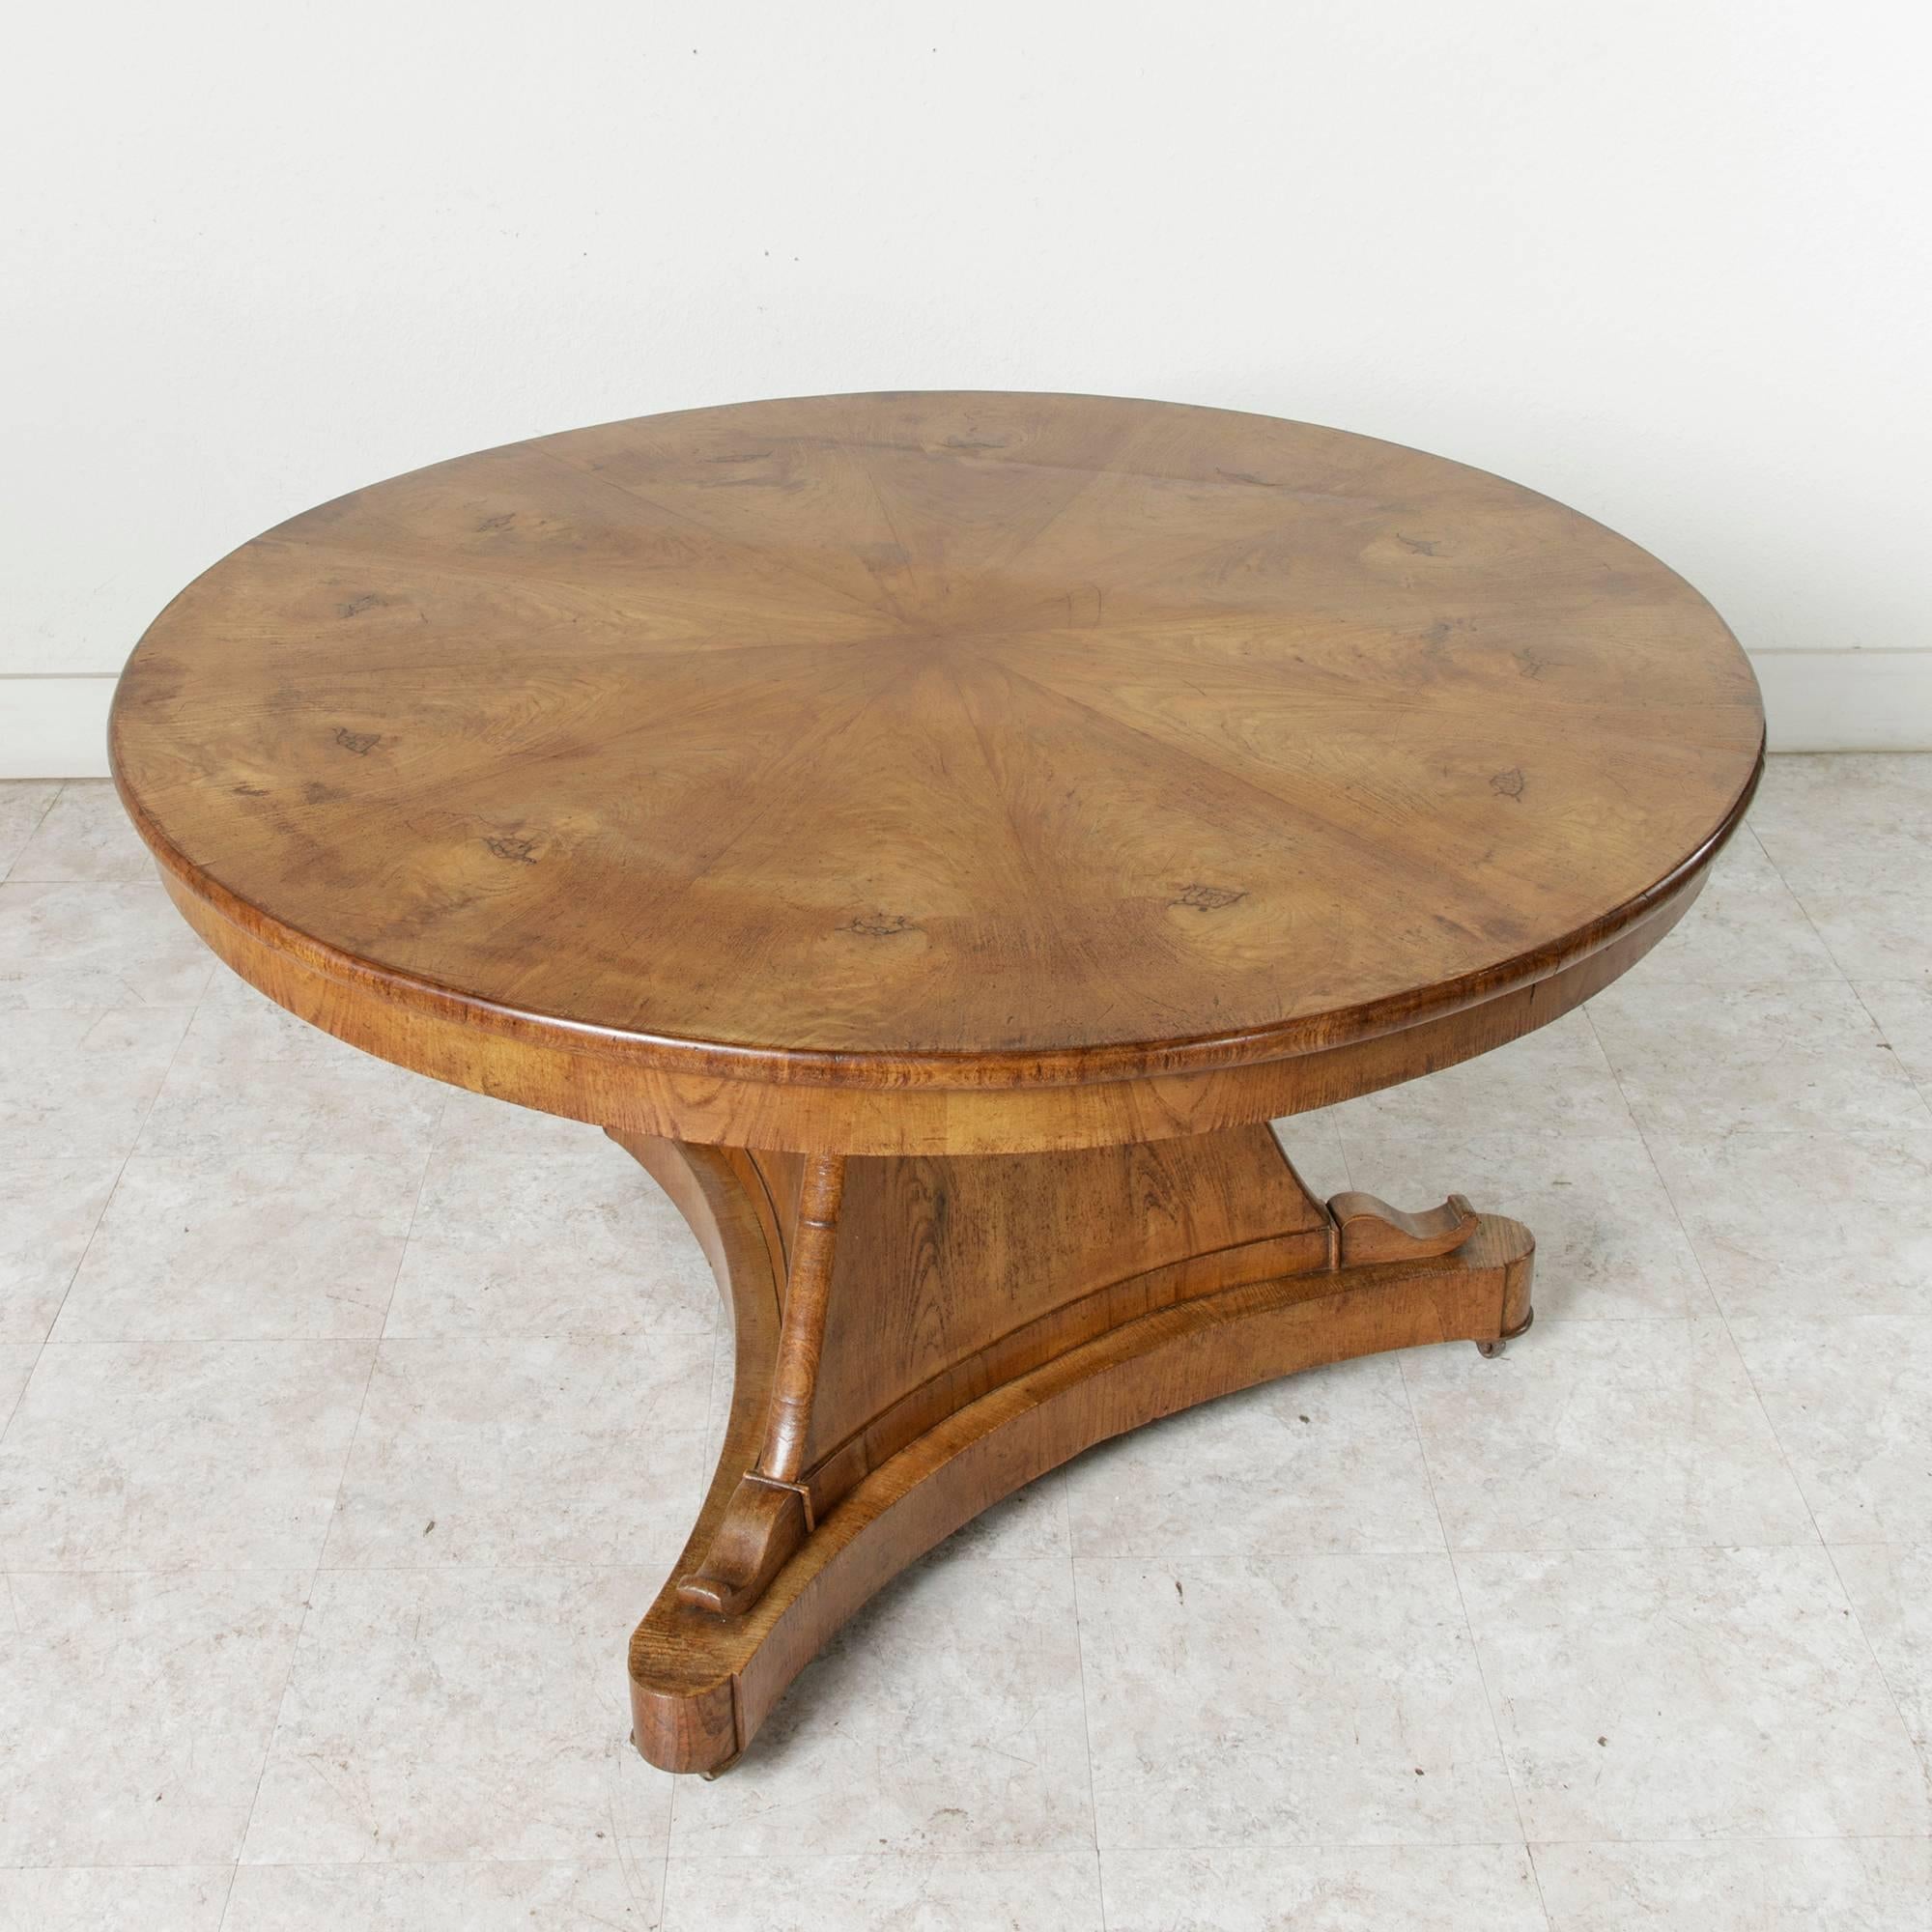 This grand entry table is a rare piece from the short Charles X period in French furniture making. Made of elmwood, this large gueridon features a book matched top that rests on a triangular pedestal base. Its 48-inch diameter hinged top tilts to a